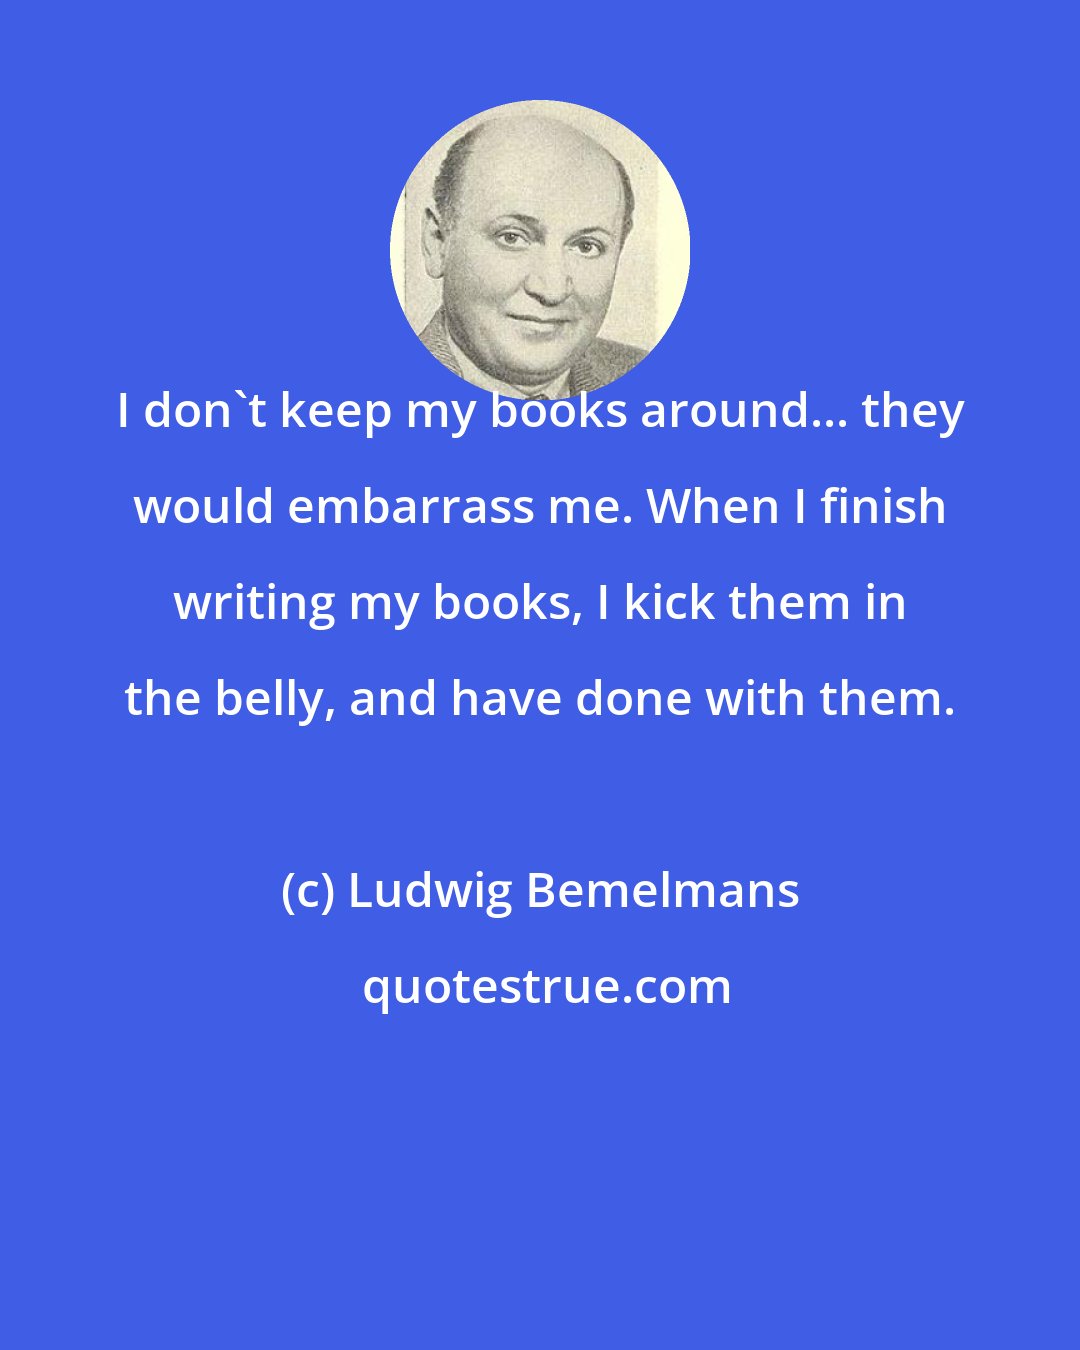 Ludwig Bemelmans: I don't keep my books around... they would embarrass me. When I finish writing my books, I kick them in the belly, and have done with them.